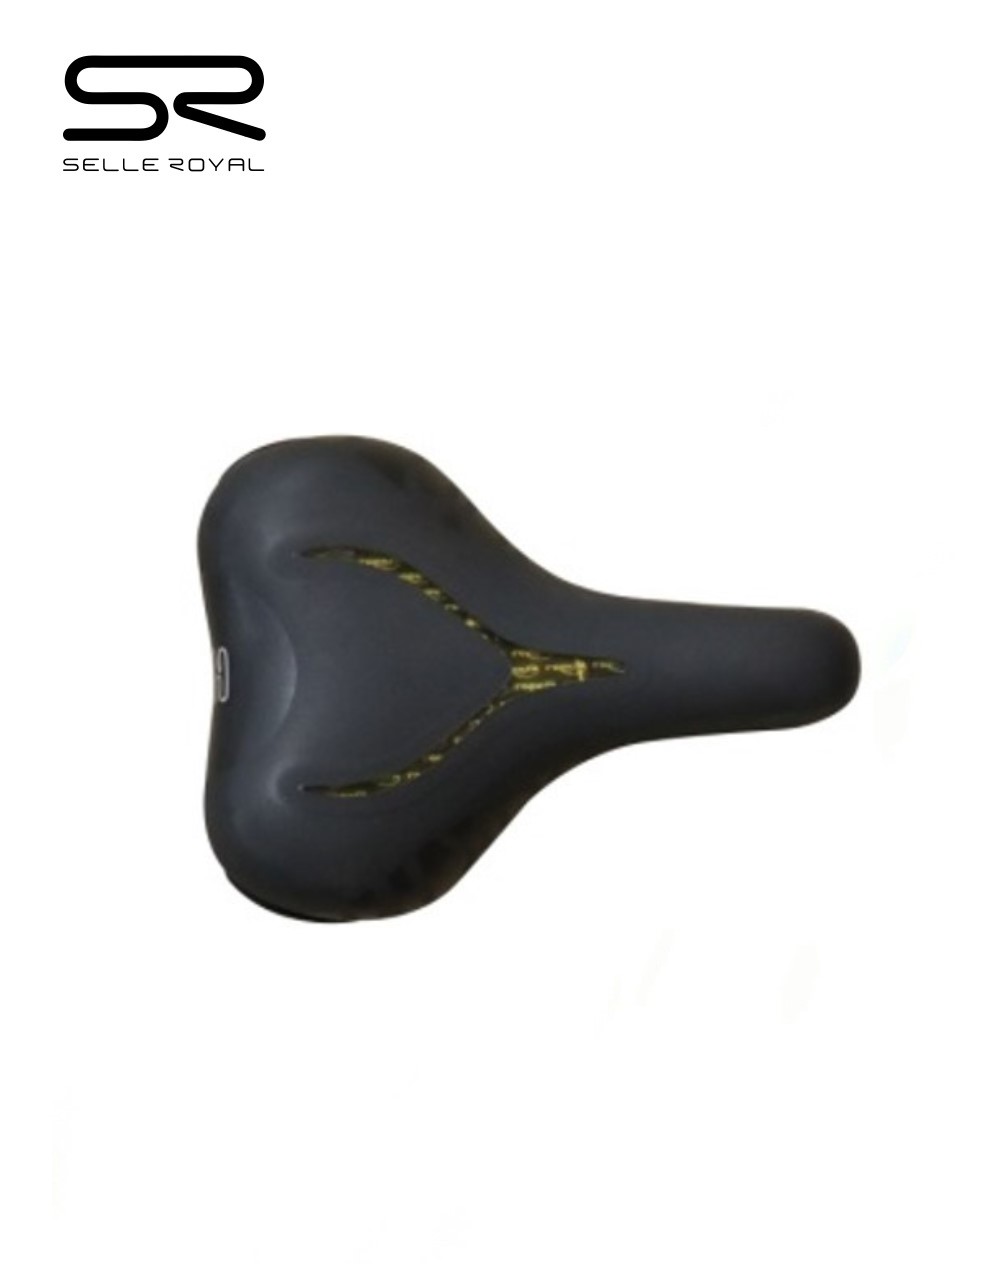 | ROYAL Buy | Saddle Accessories Saddle in Saddles SELLE Online Bike Buy Shop | Bicycle Cycle